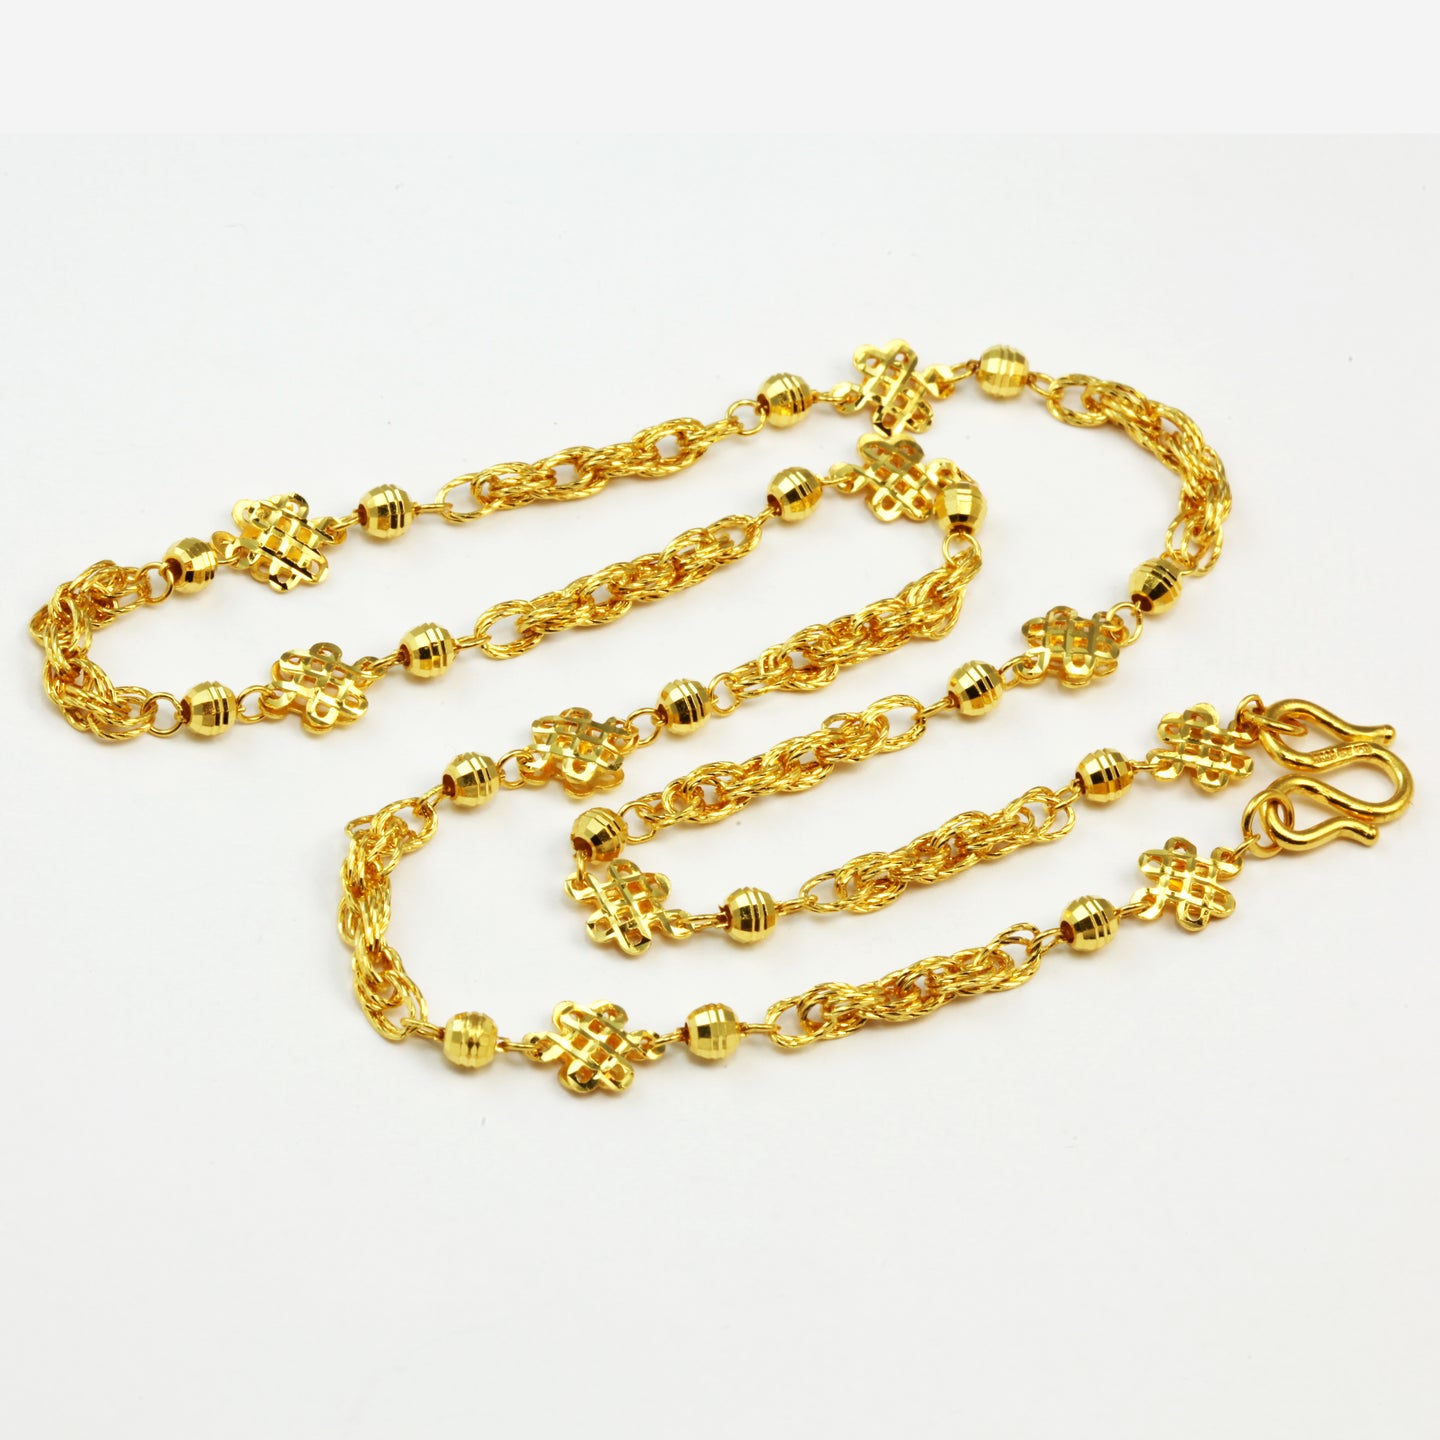 24K Solid Yellow Gold Design Chain 17.8 Grams